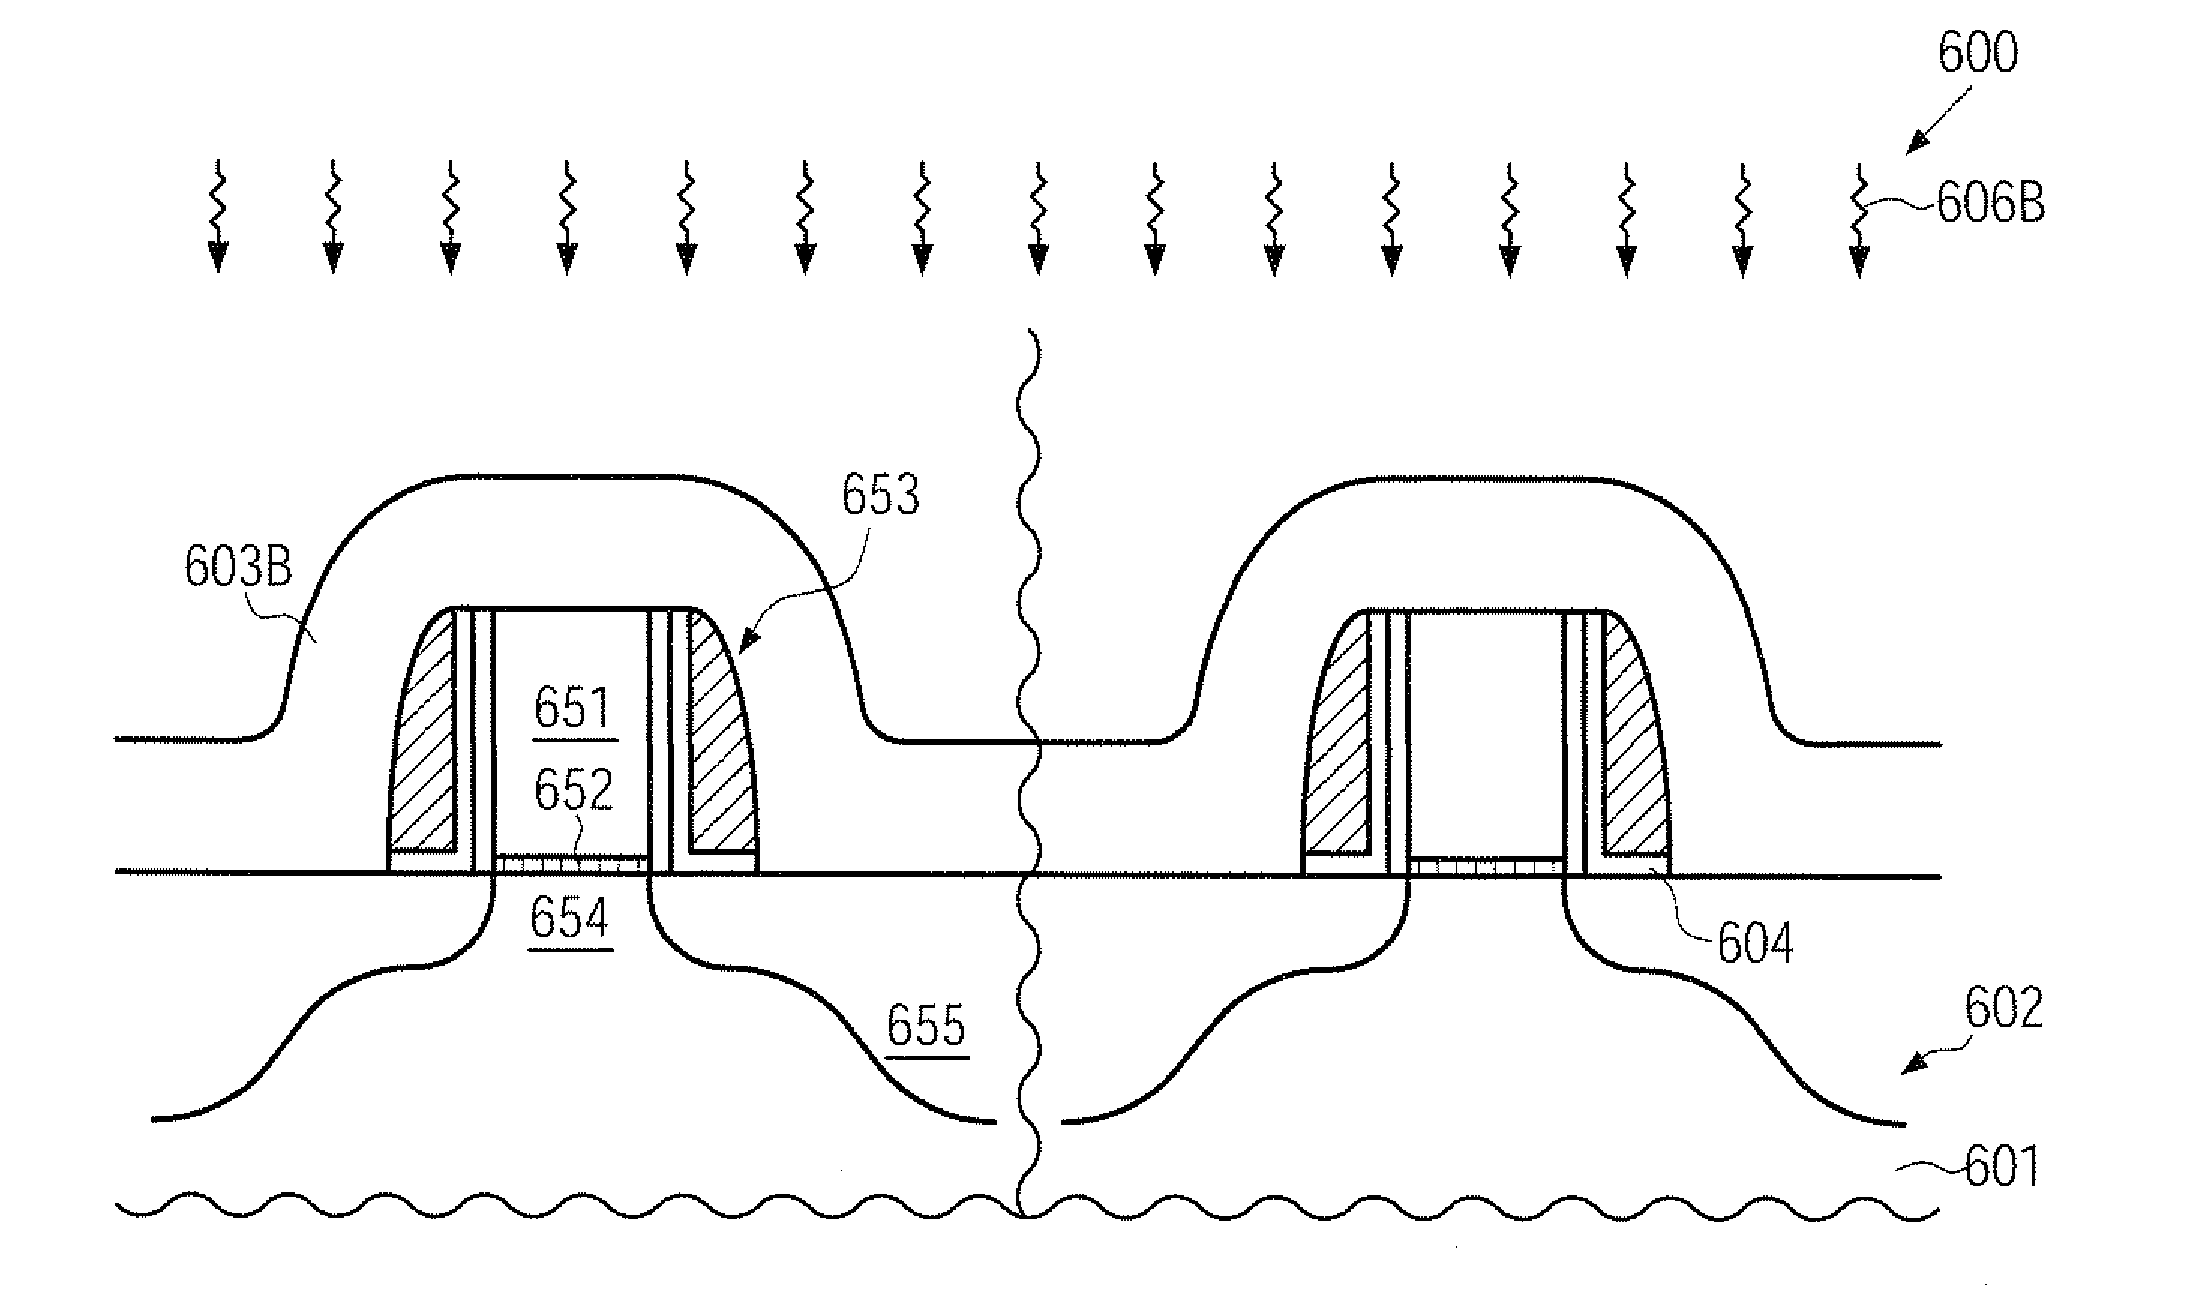 Method for selectively forming strain in a transistor by a stress memorization technique without adding additional lithography steps